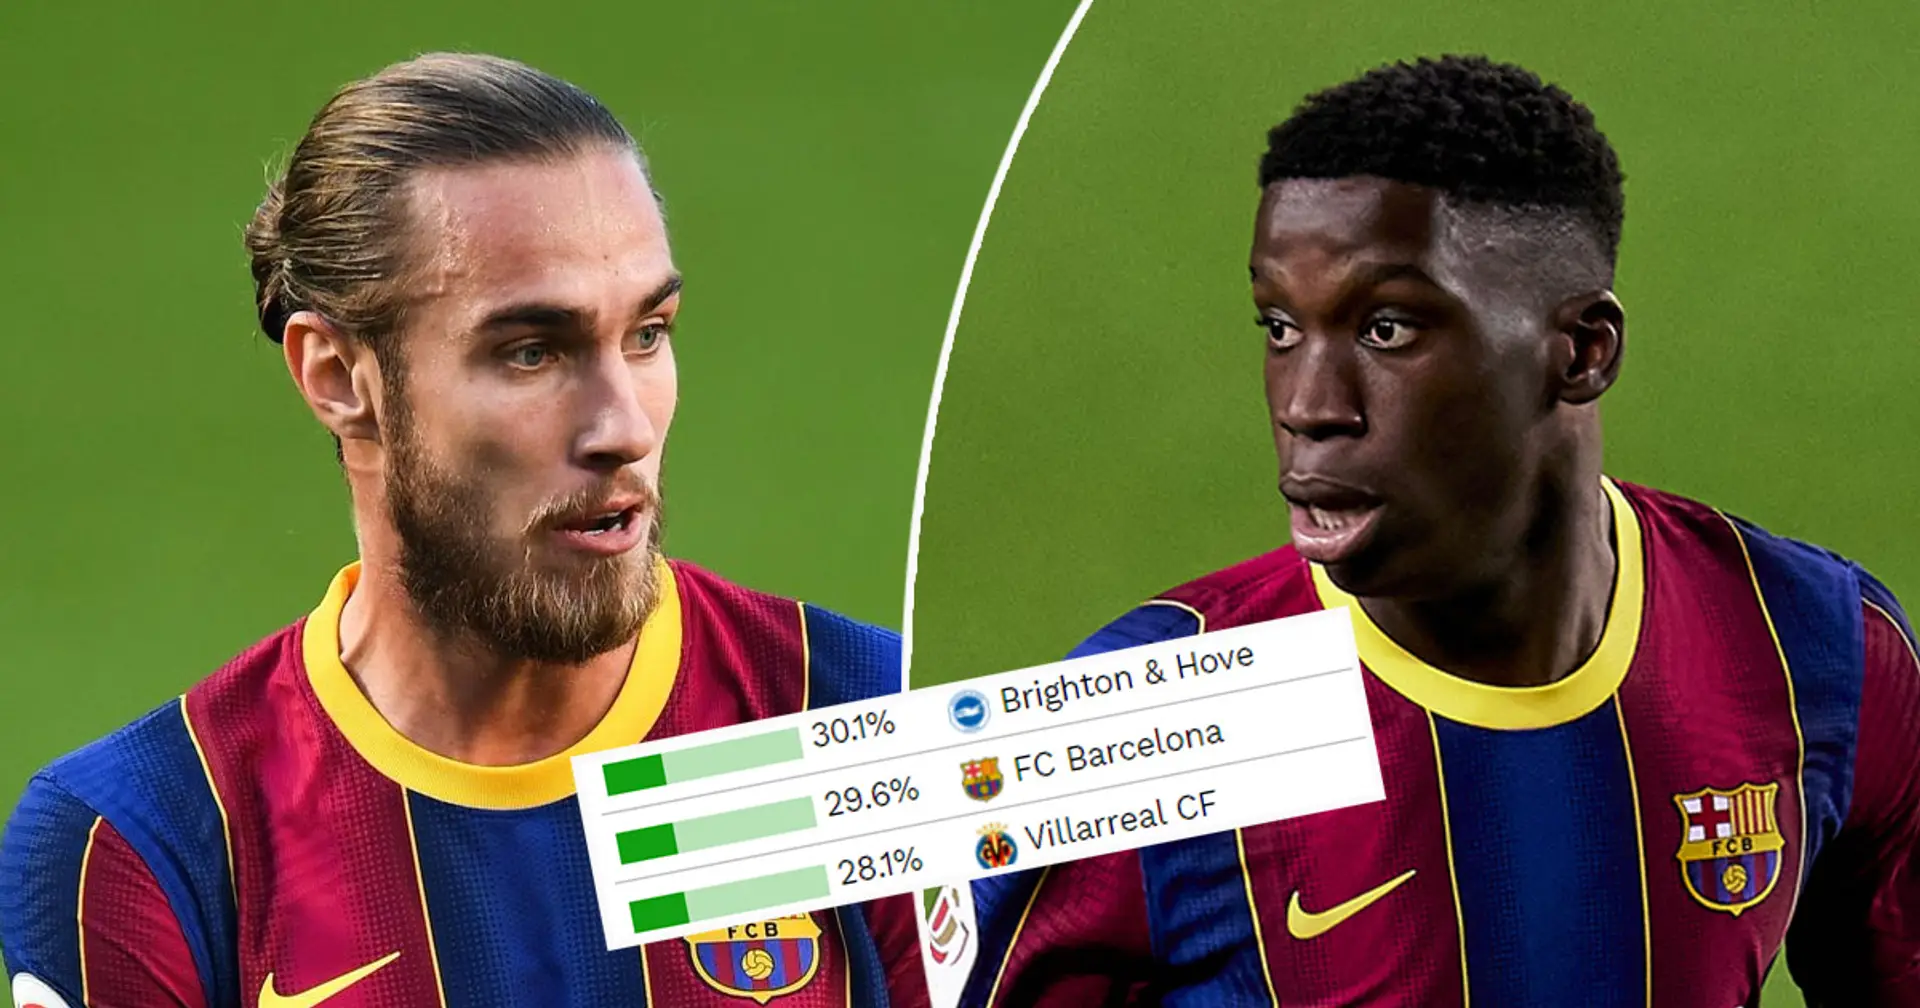 Revealed: Where Barca stand among clubs with highest percentage of minutes played by homegrown players